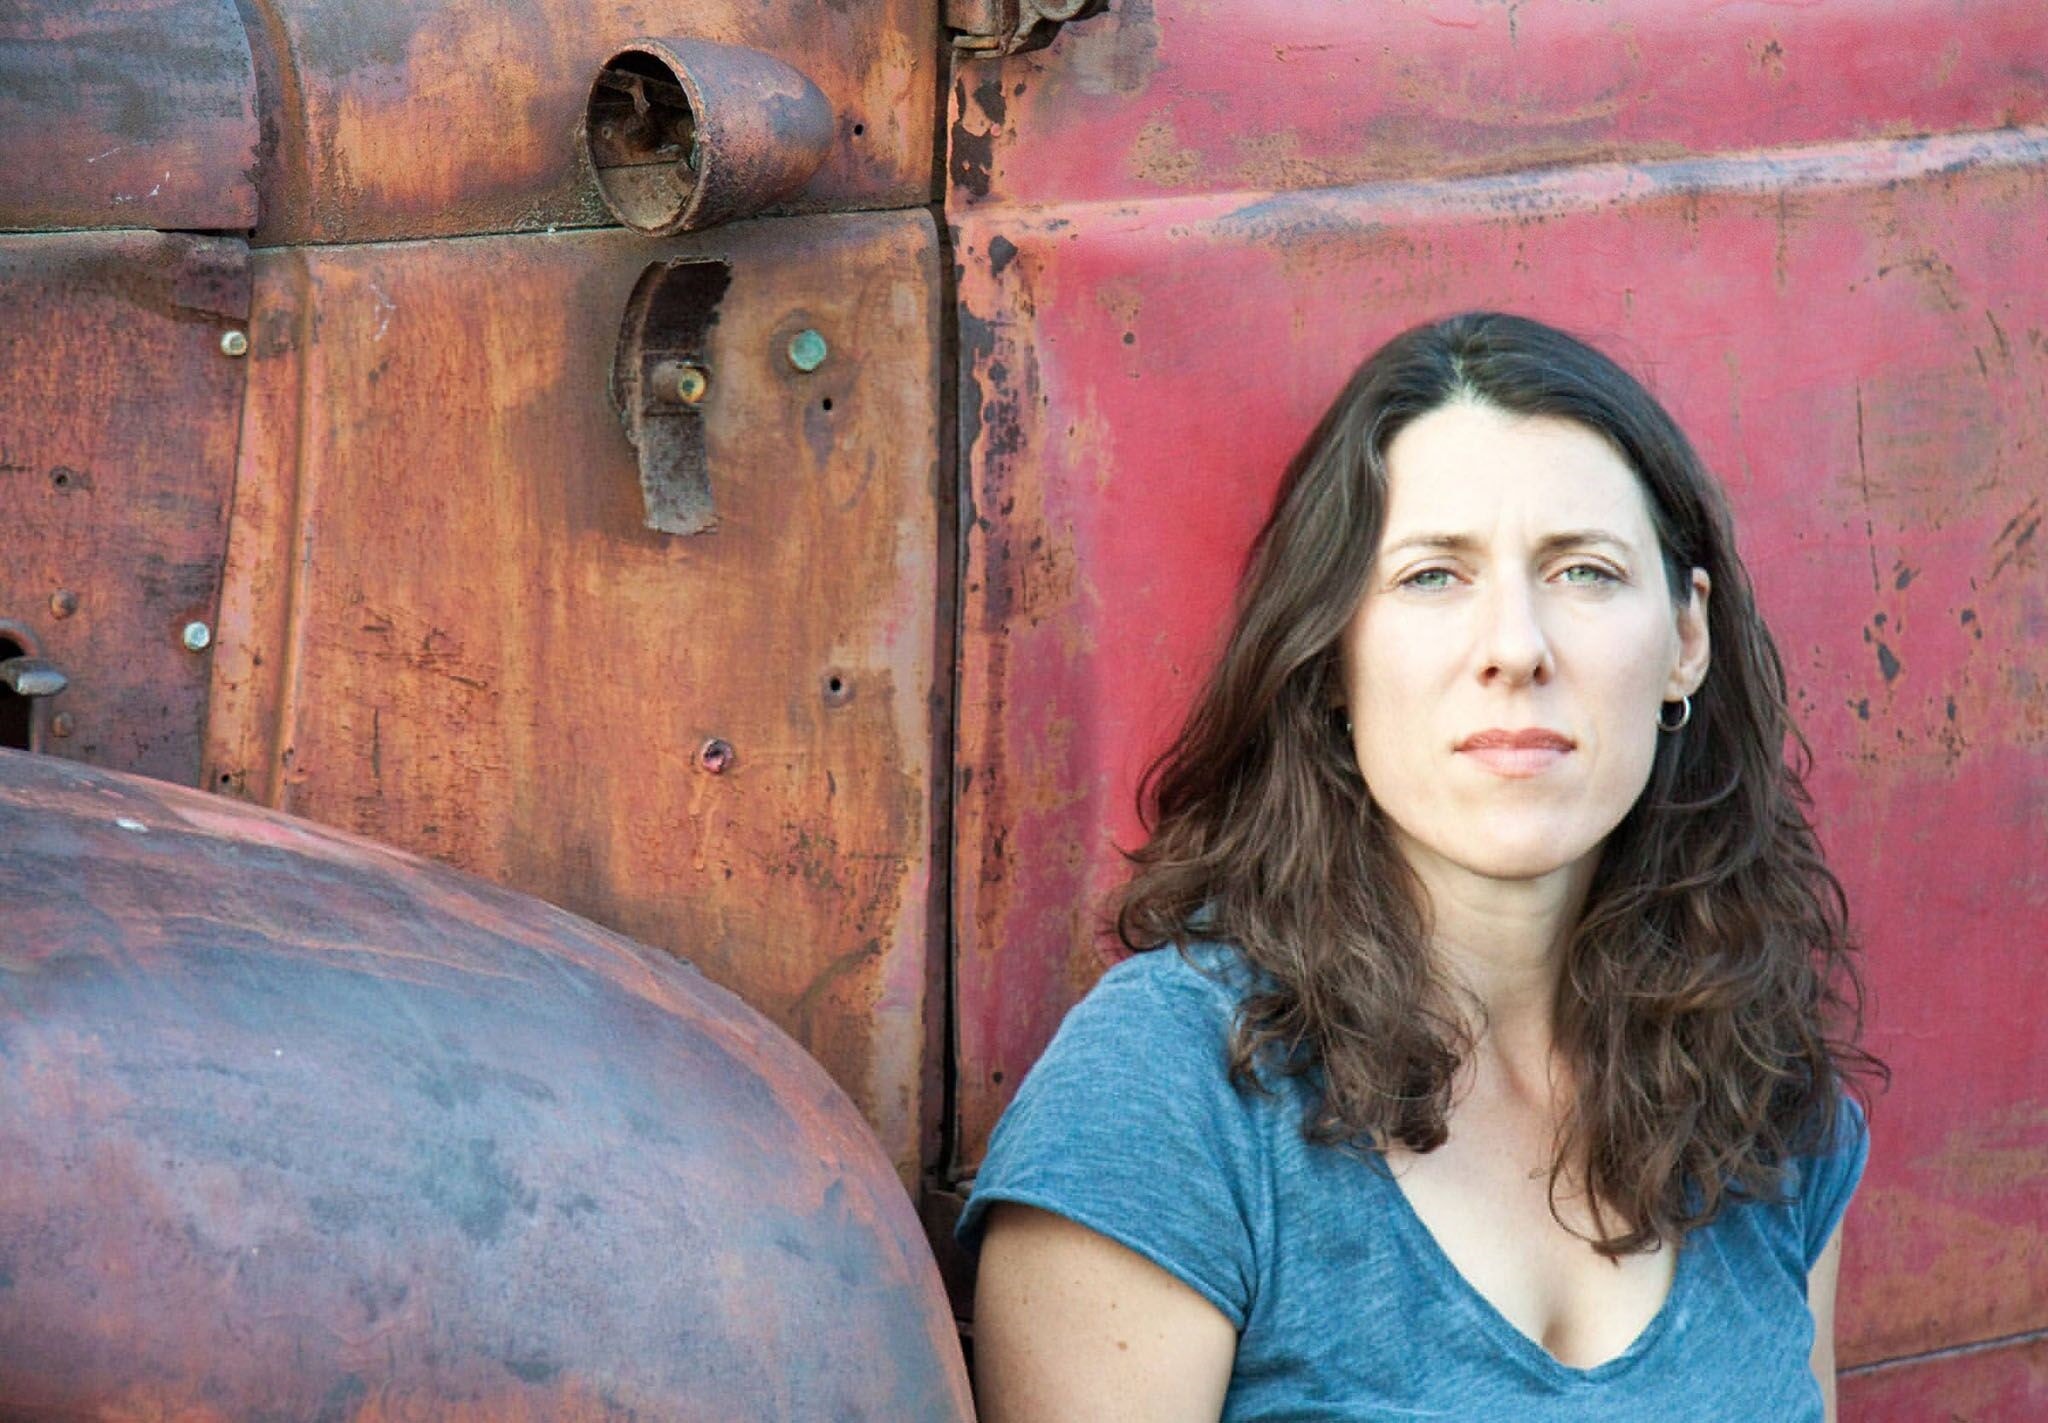 Annabell Chvostek in front of an old red truck